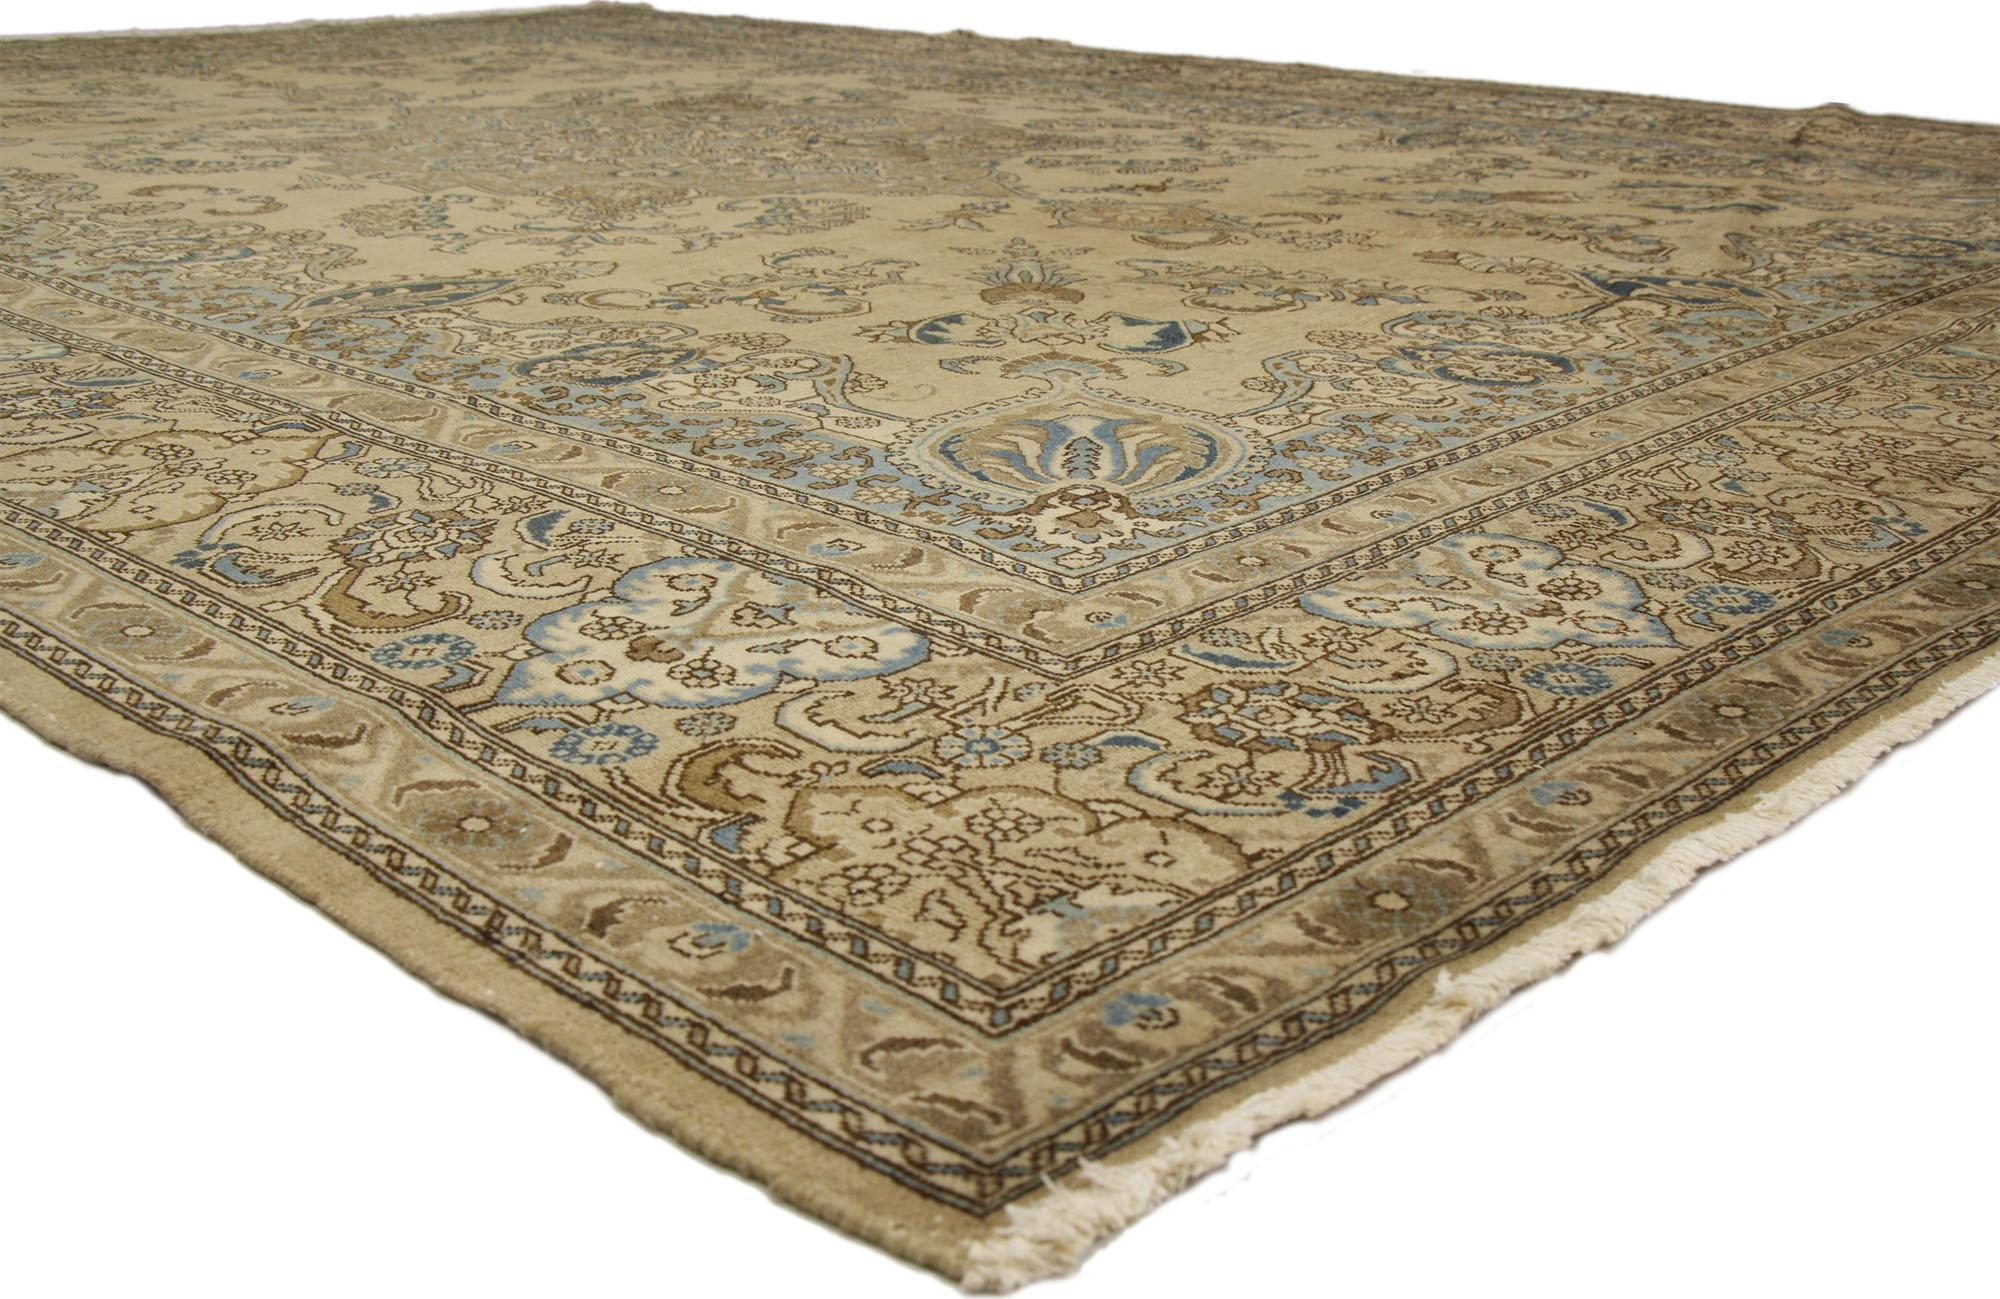 72641 Antique Persian Tabriz Medallion rug with Traditional style and coastal vibes. Emanating coastal vibes with a warm coastal color palette, this hand-knotted wool antique Persian Tabriz rug is a captivating vision of woven beauty. The abrashed